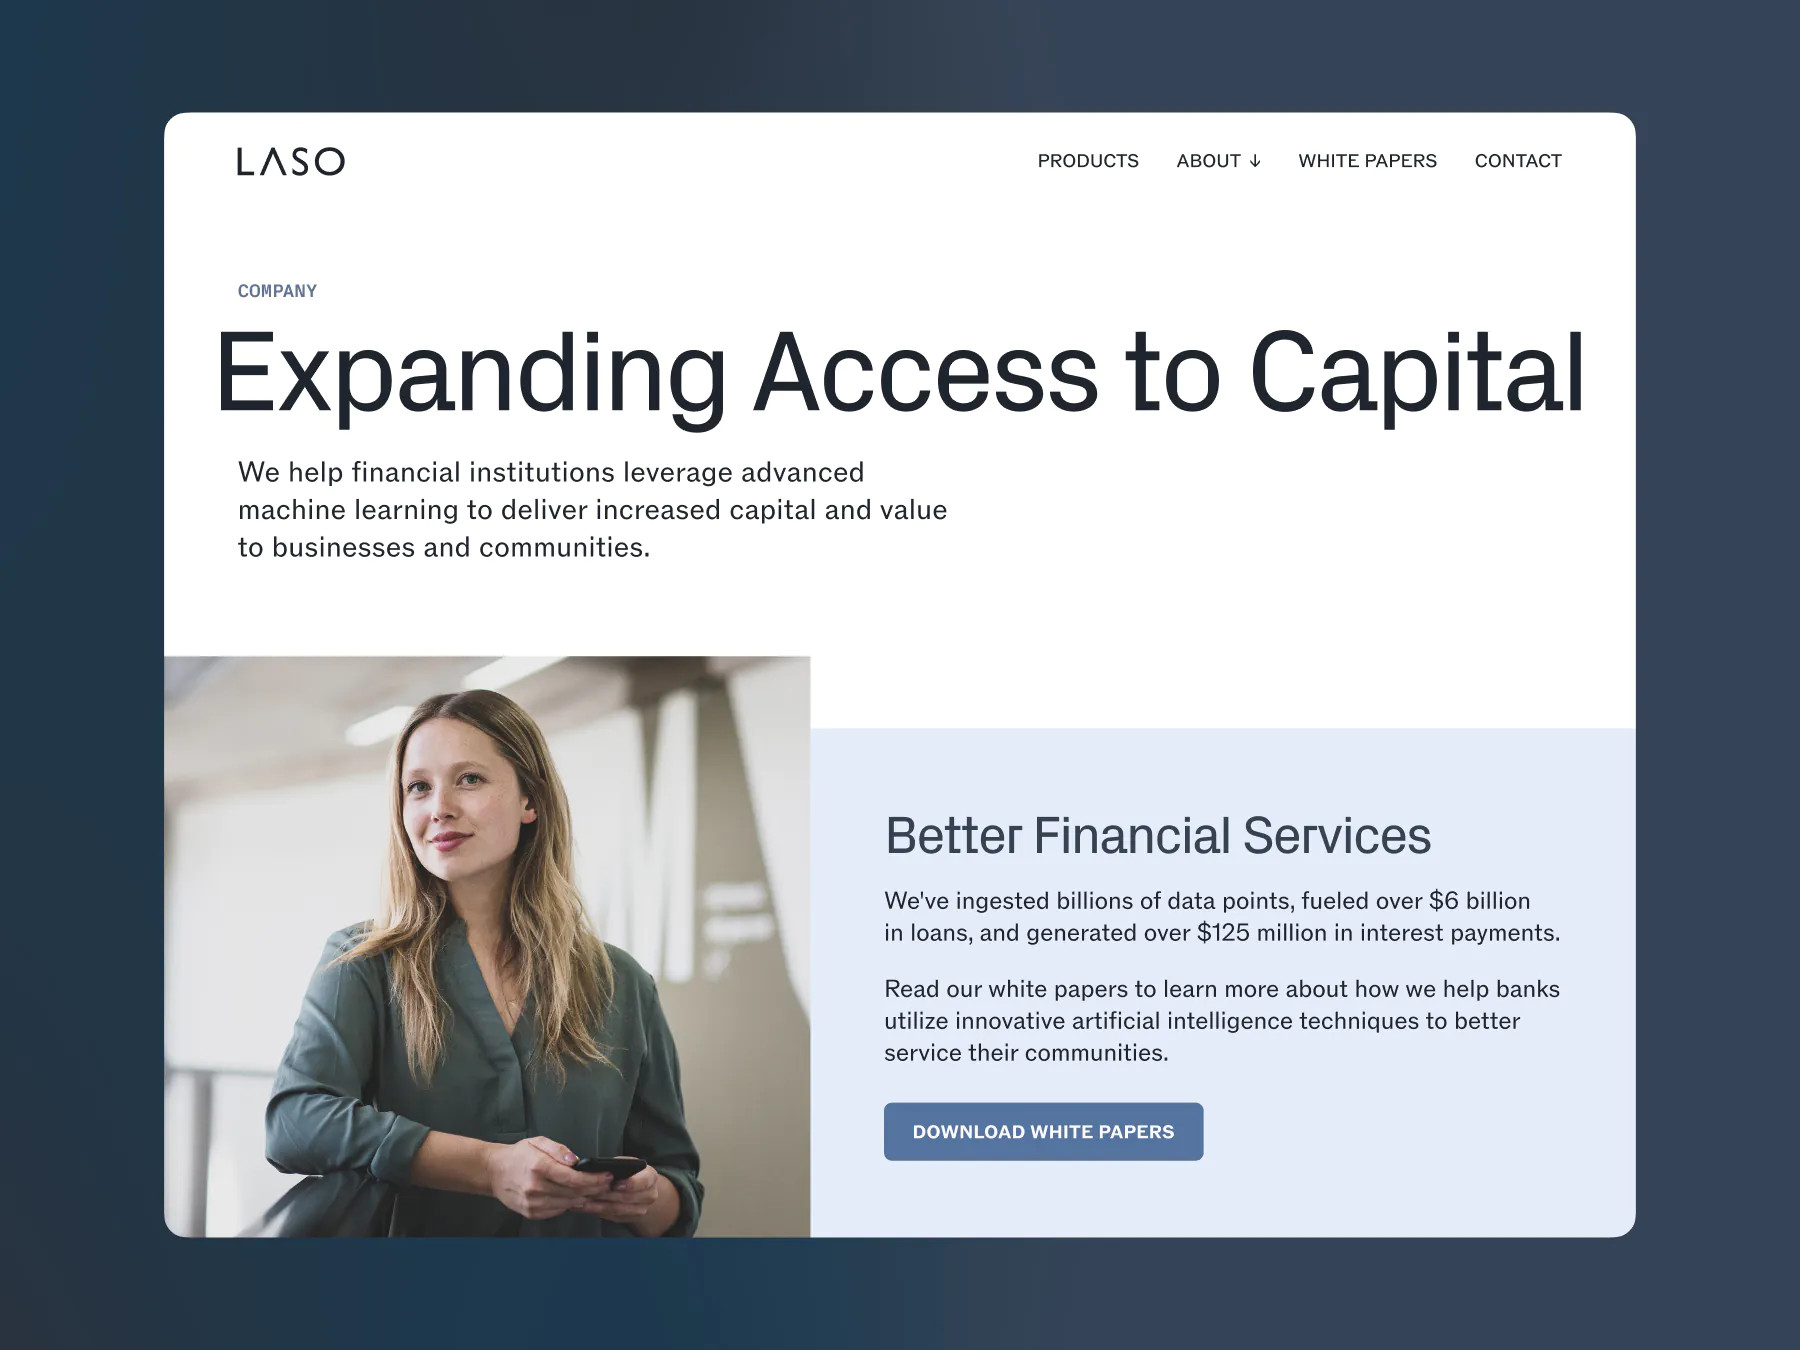 Laso company page highlights its mission to expand access to capital with a photo of a businesswoman using a smartphone.